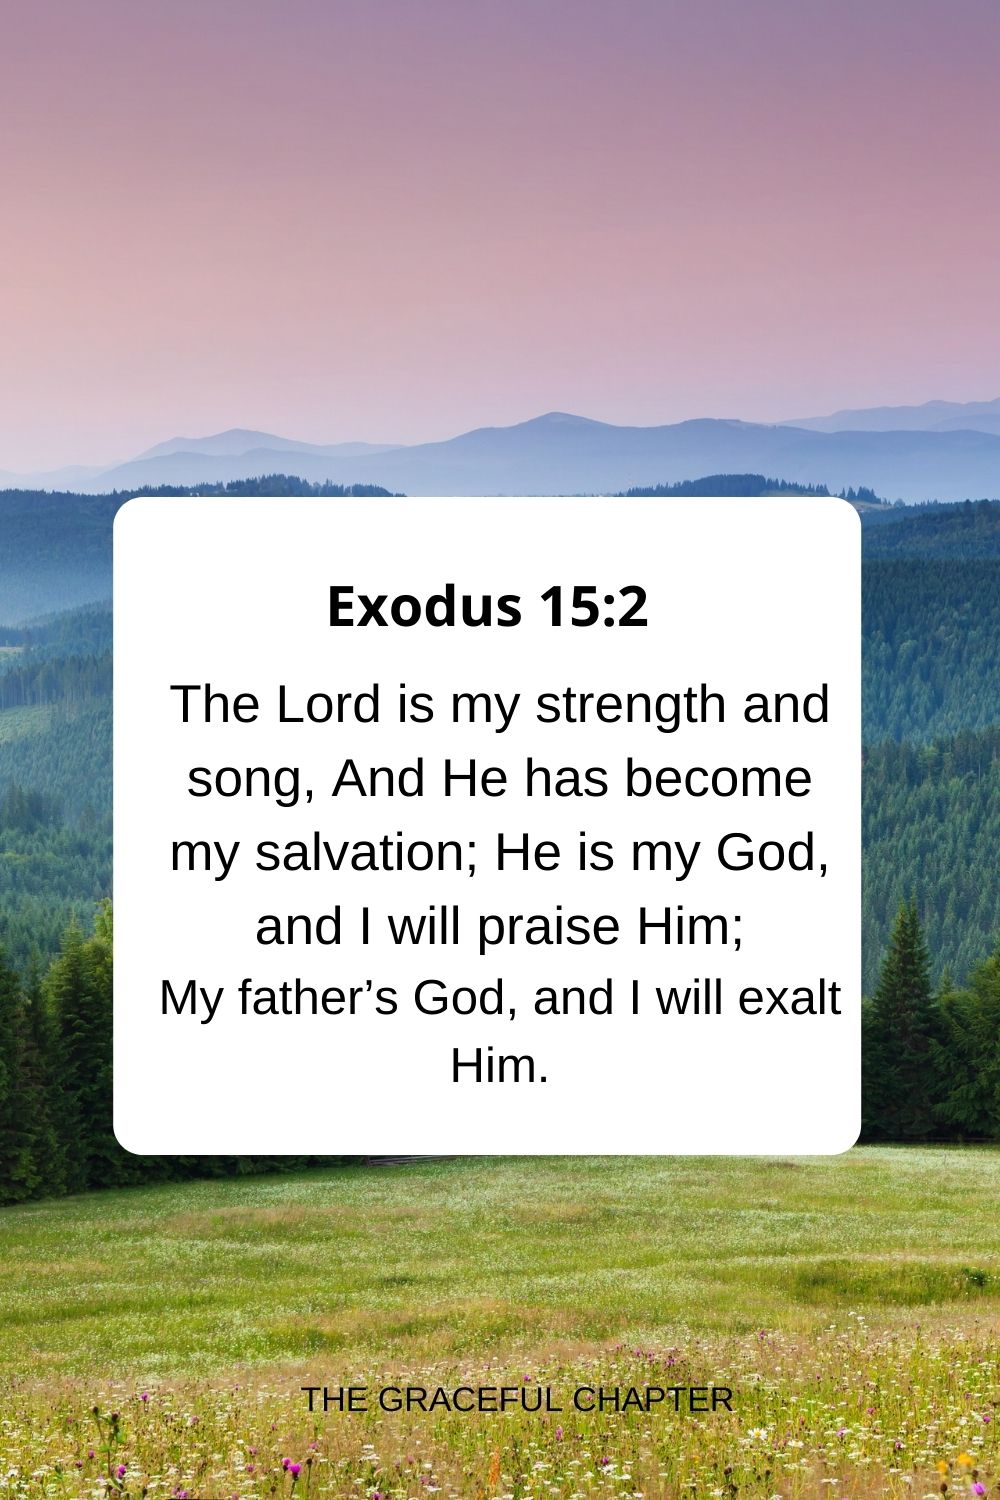 The Lord is my strength and song, And He has become my salvation; He is my God, and I will praise Him; My father’s God, and I will exalt Him. Exodus 15:2